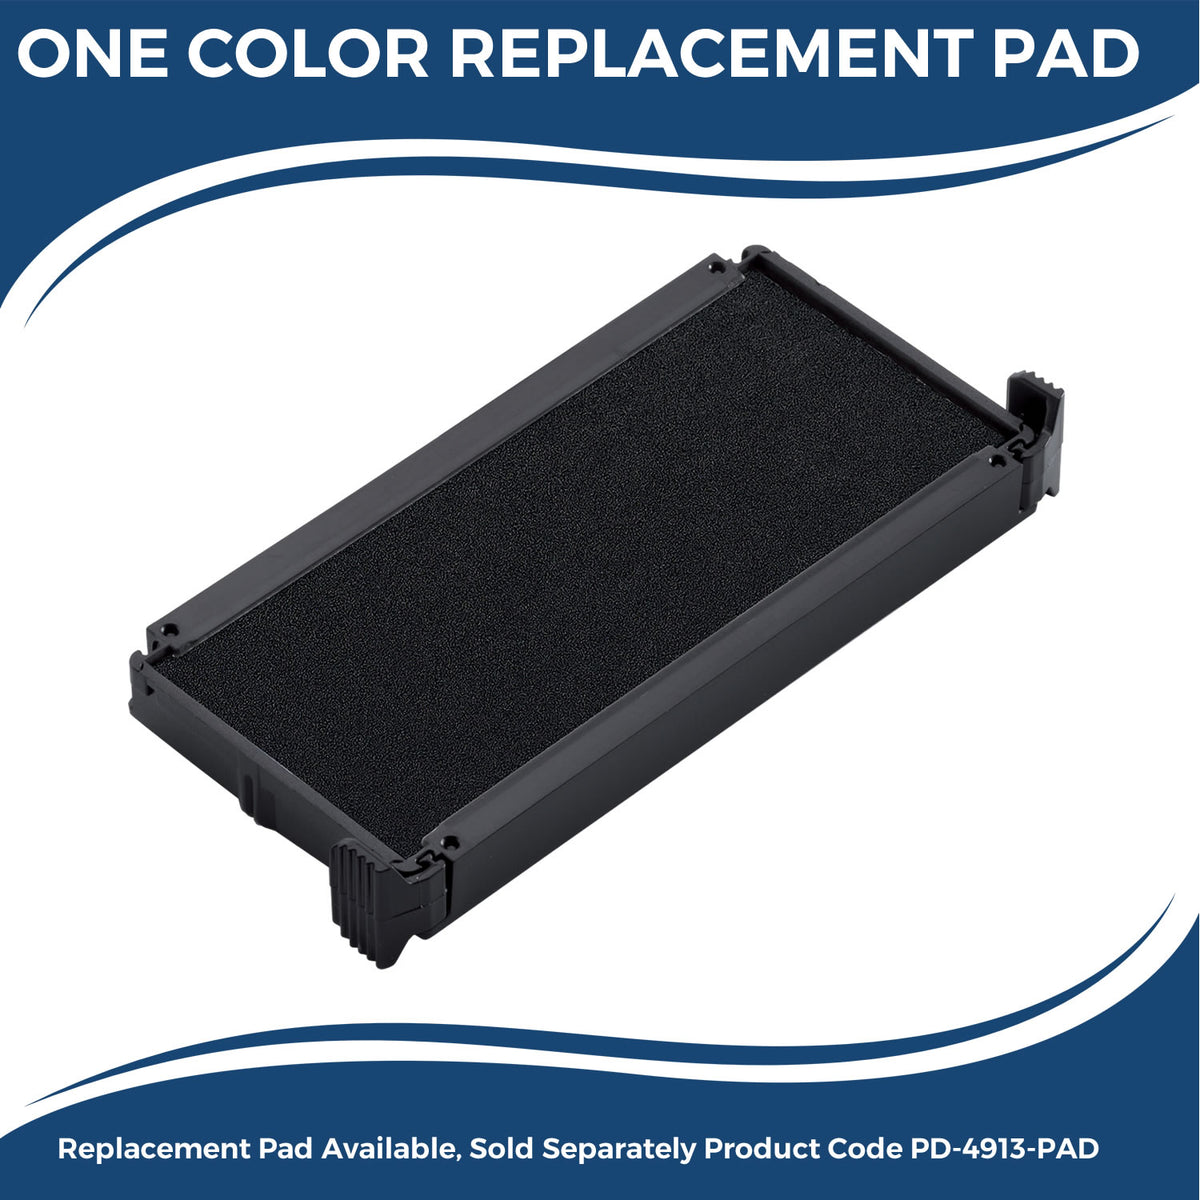 Large Self Inking Personal Stamp 4142S Large Replacment Pad